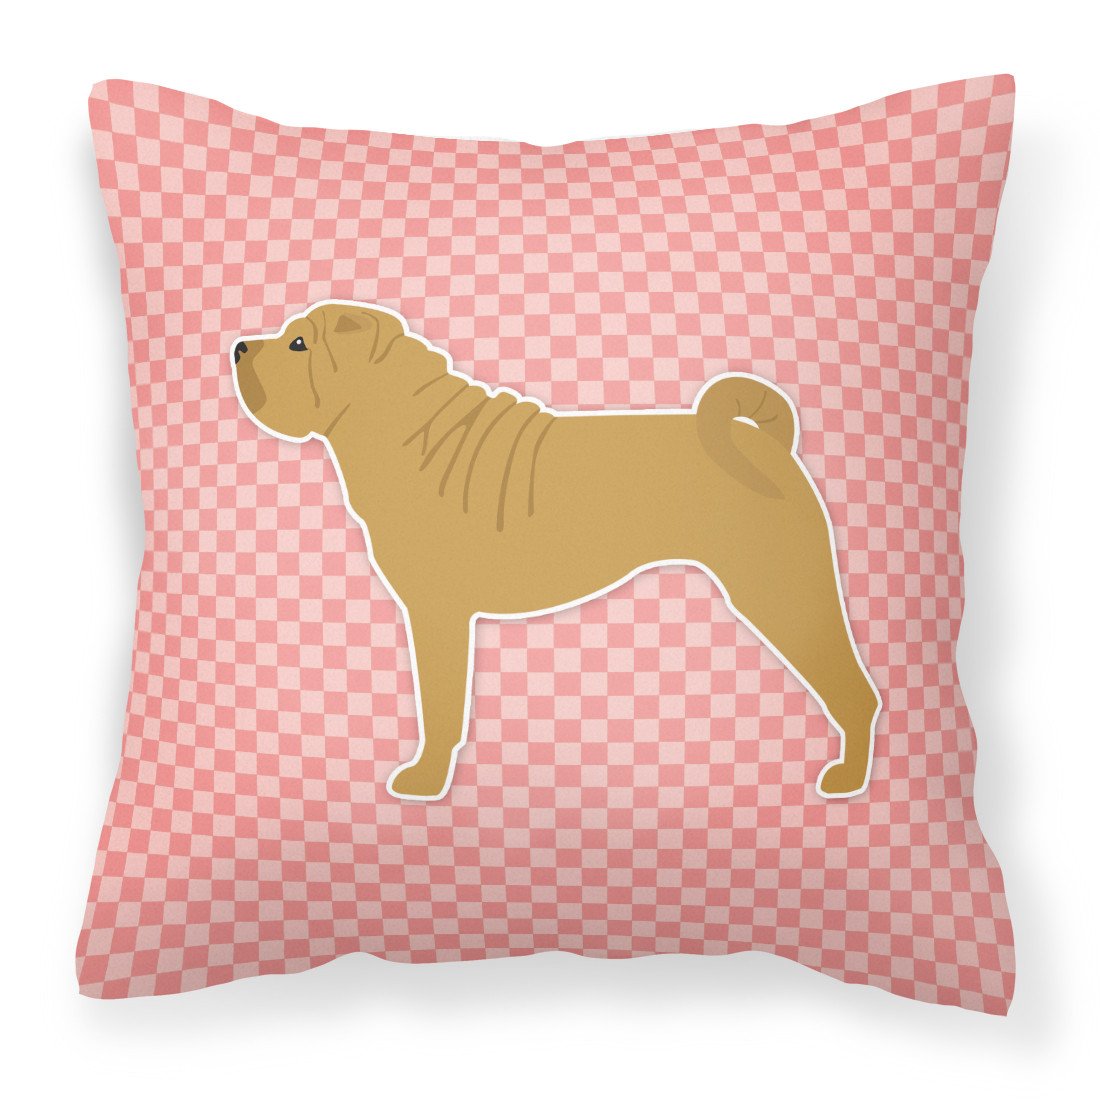 Shar Pei Merry Checkerboard Pink Fabric Decorative Pillow BB3652PW1818 by Caroline's Treasures